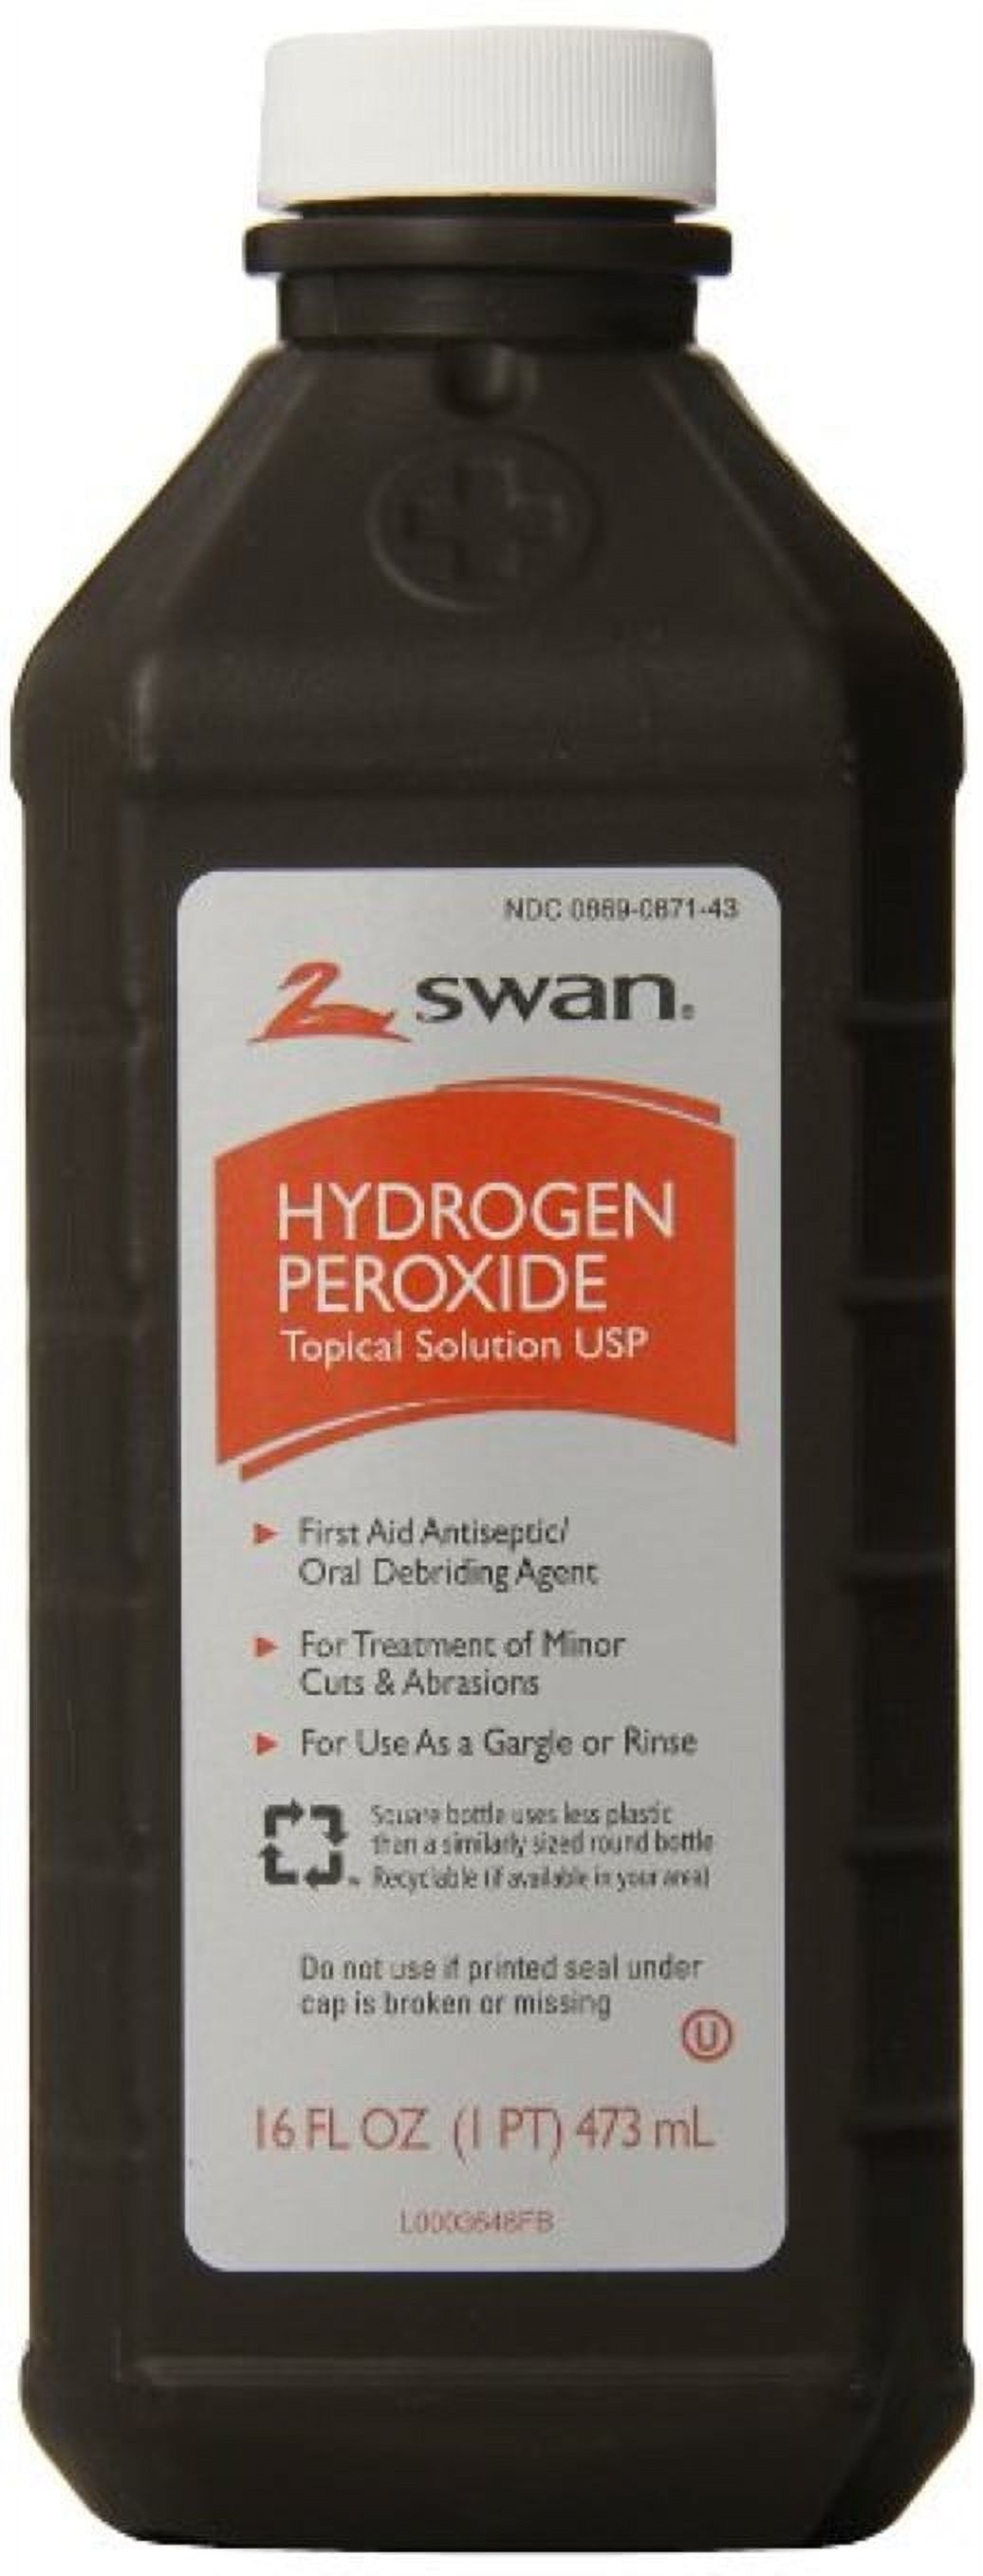 Swan Hydrogen Peroxide Topical Solution, 16 oz - image 2 of 4